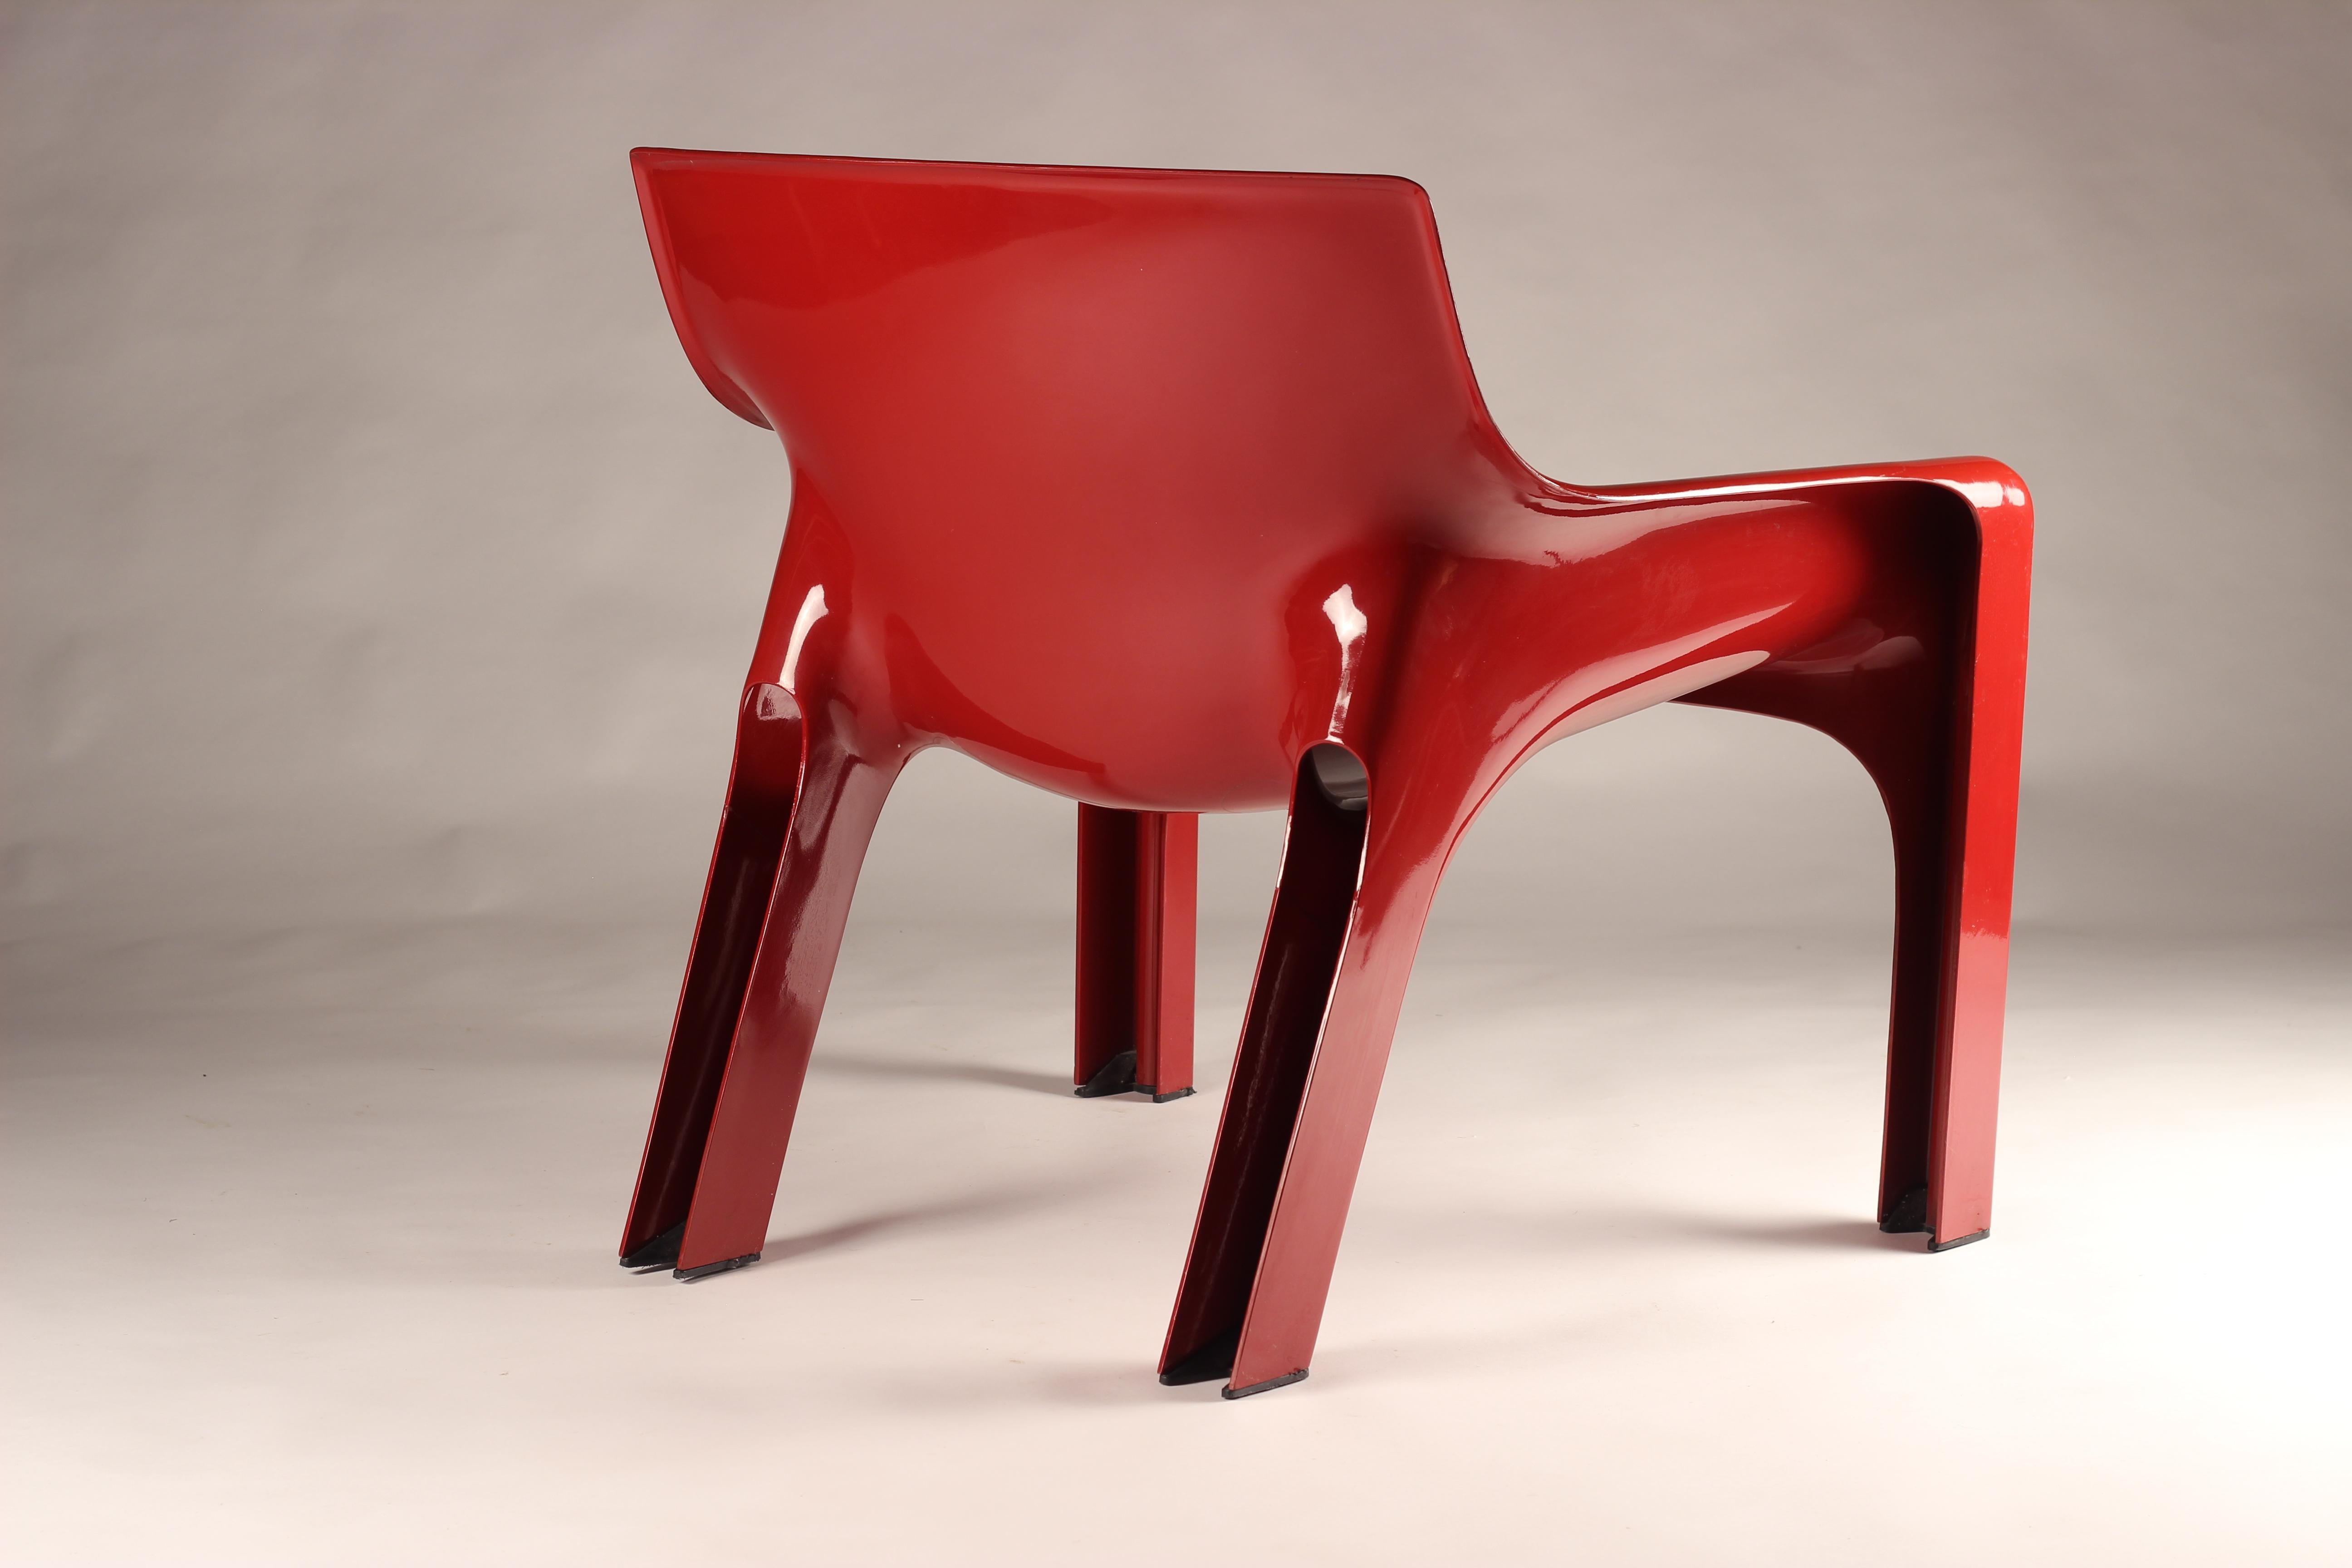 Late 20th Century Pair of Red Vicario Lounge Chairs Design by Vico Magistretti Made by Artemide